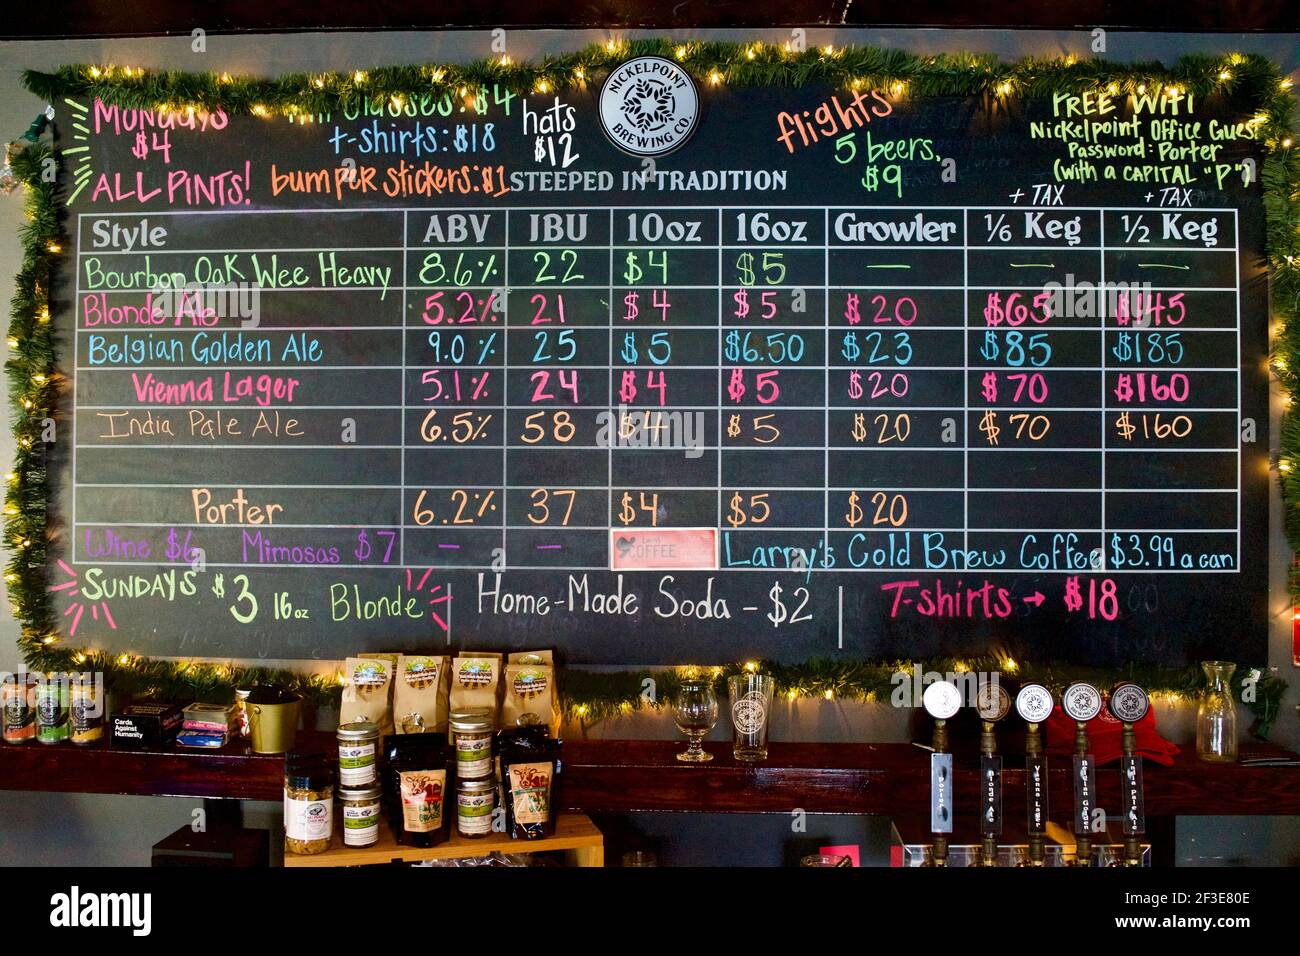 Nicklepoint Brewing Company in Raleigh, NC.  Local craft brewery with wide selection of beers, ales, and stouts. Stock Photo